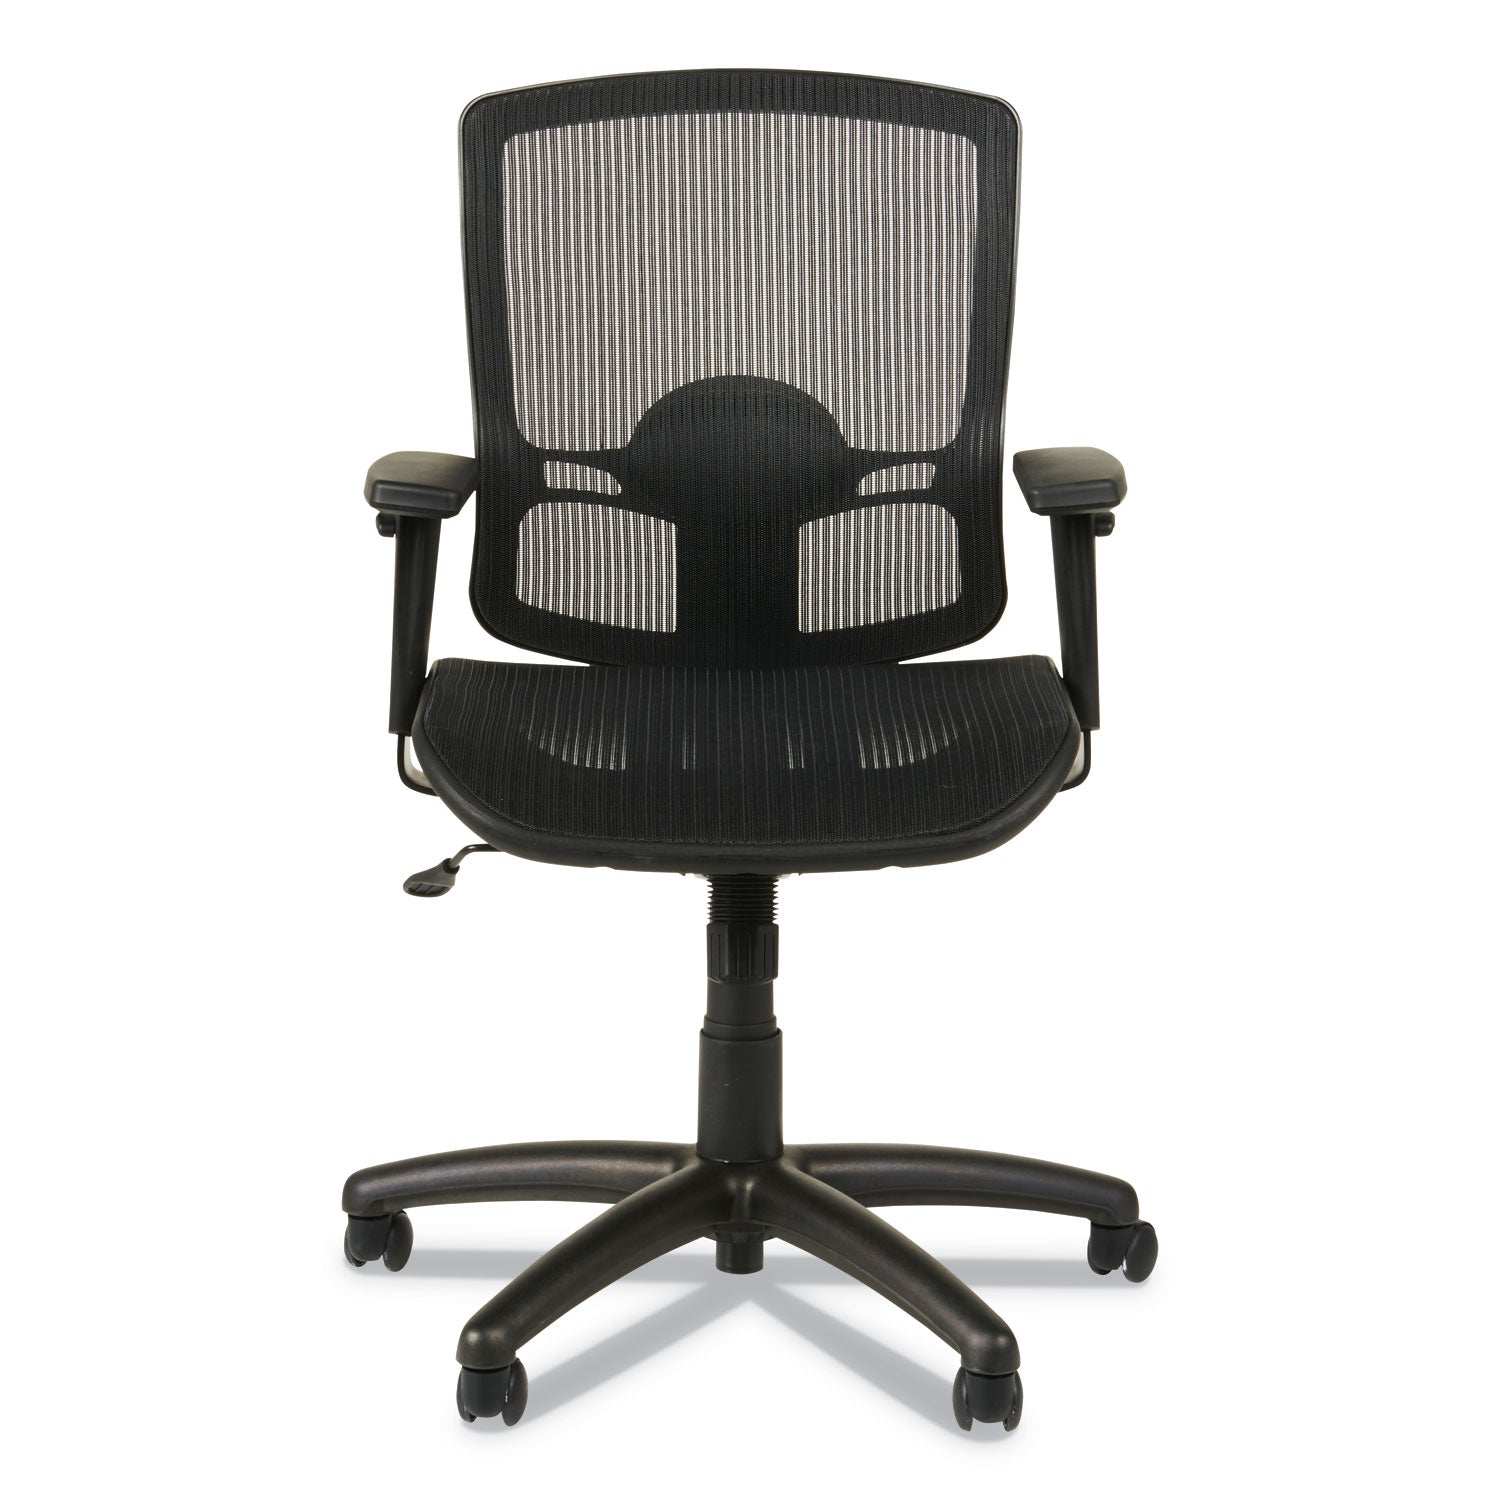 Alera Etros Series Suspension Mesh Mid-Back Synchro Tilt Chair, Supports Up to 275 lb, 15.74" to 19.68" Seat Height, Black - 